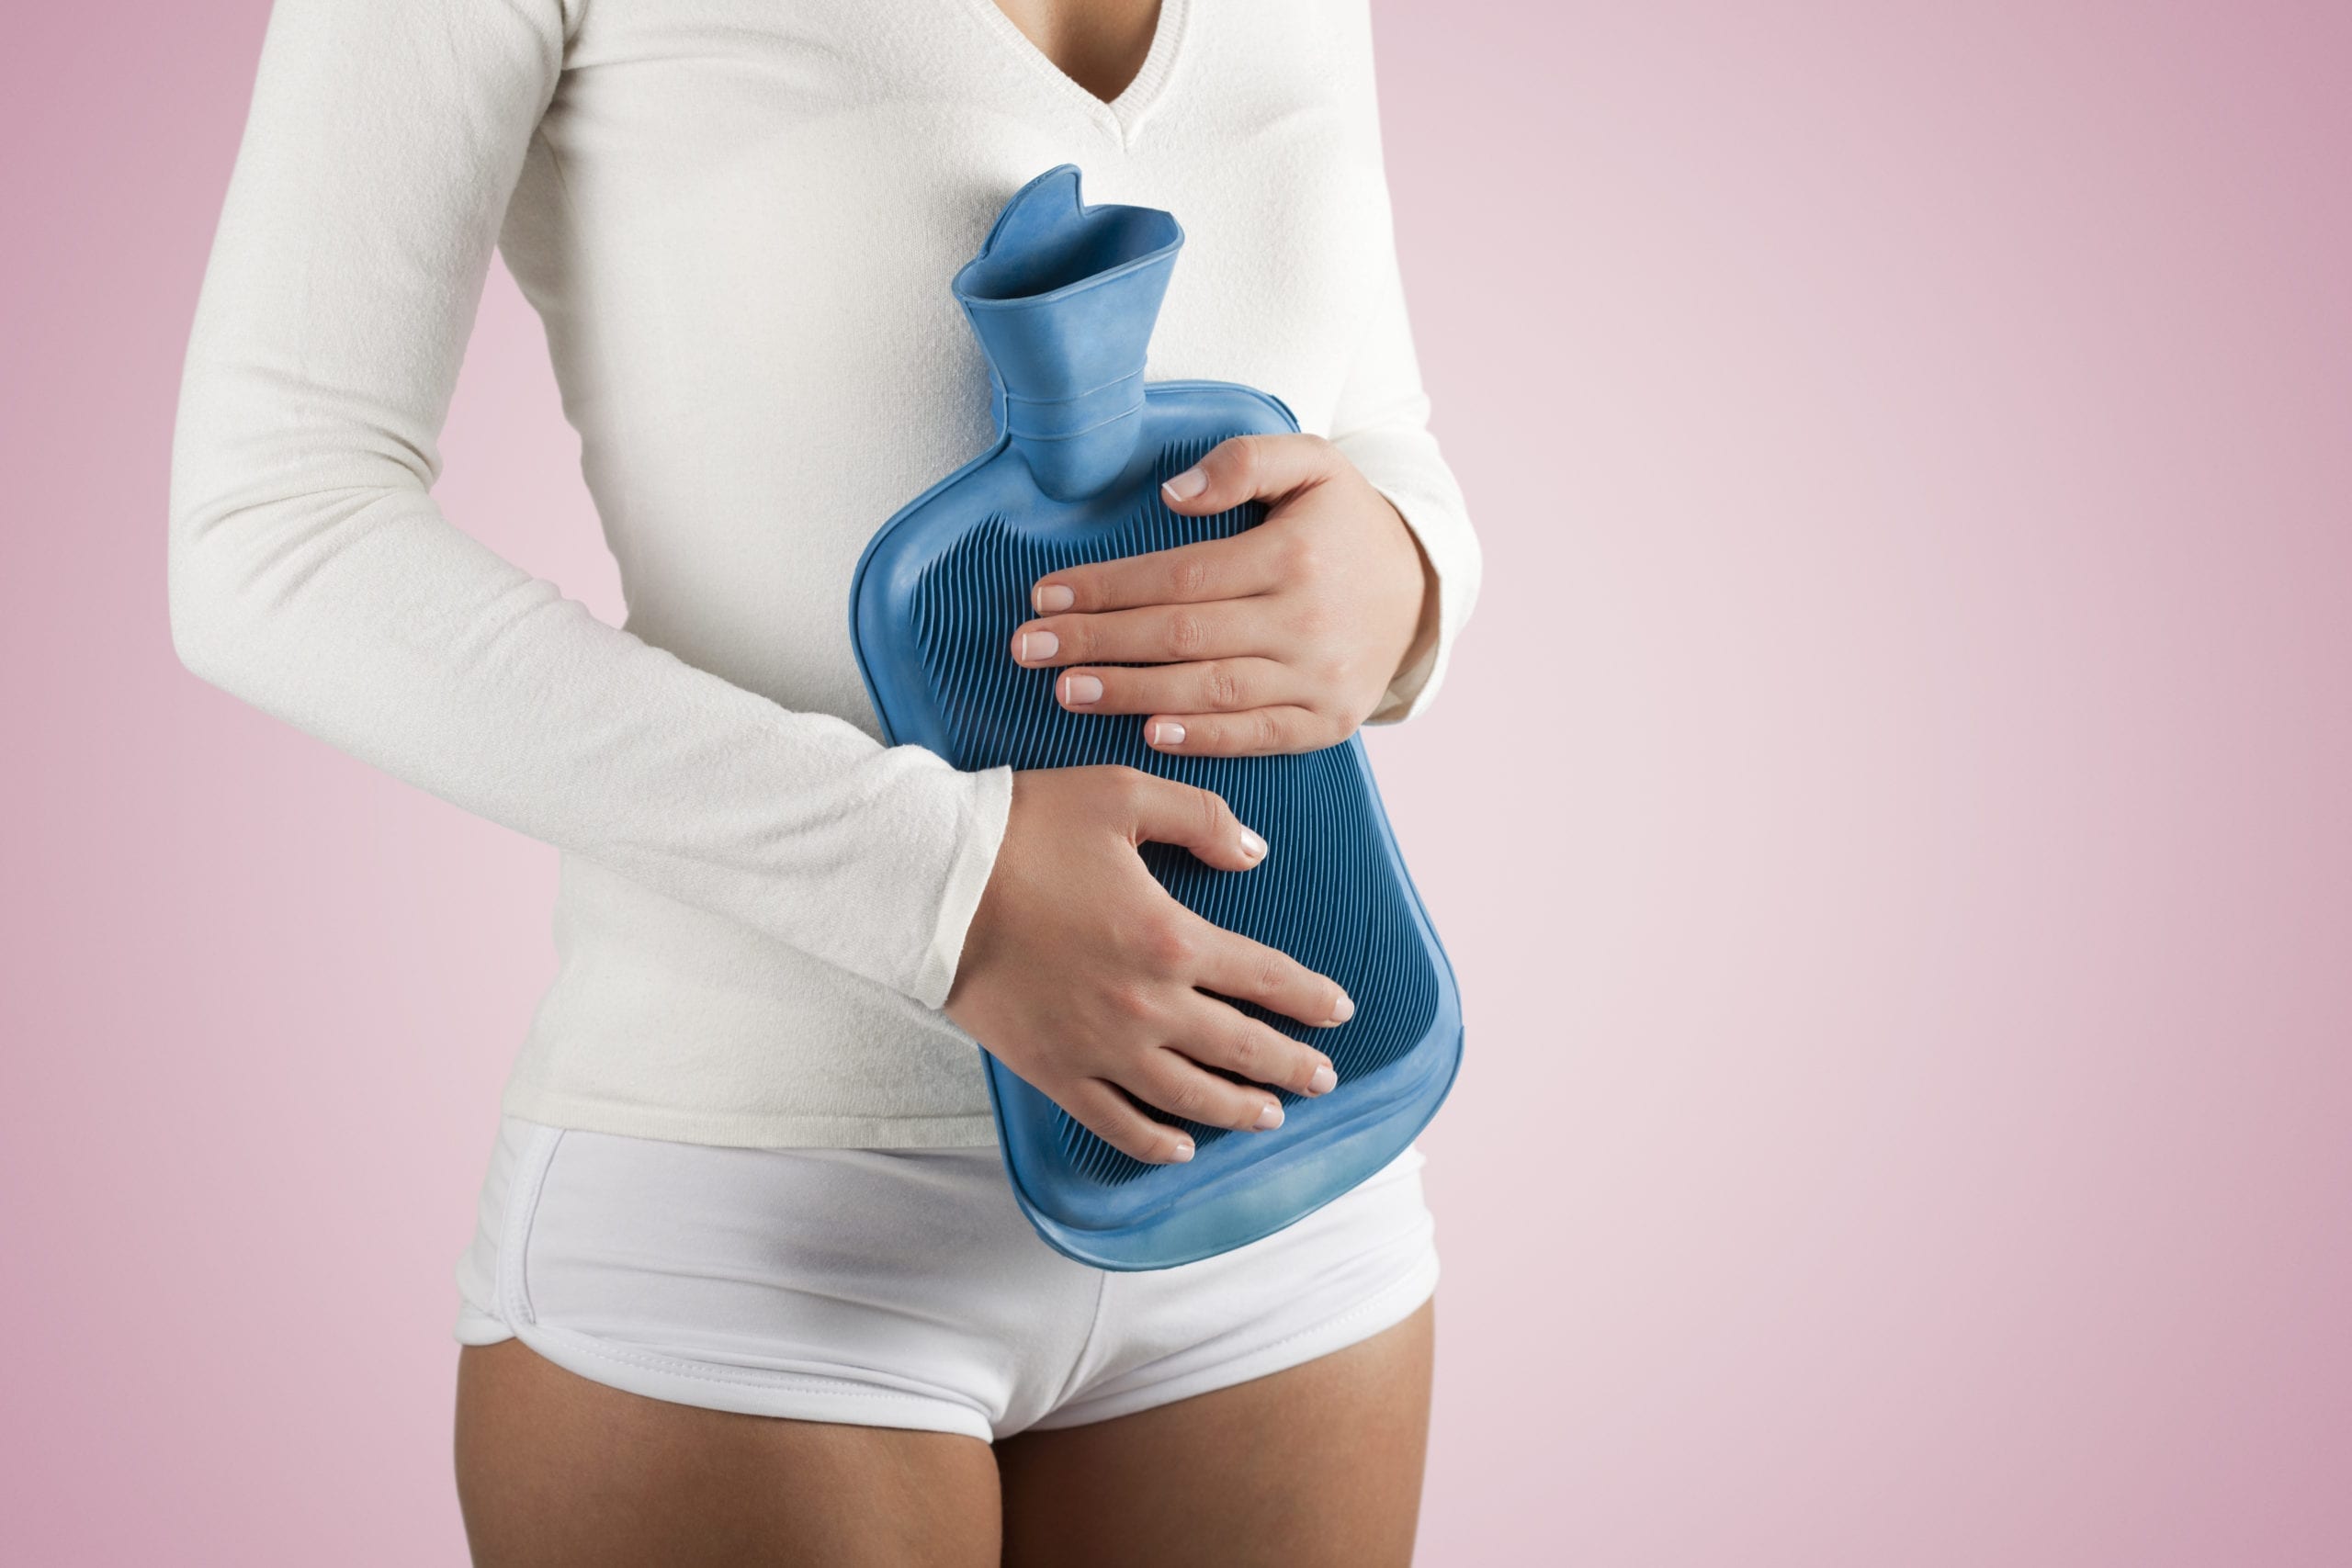 Woman having stomachache, holding with hot water bottle on pink background; highlighting the symptoms of SIBO